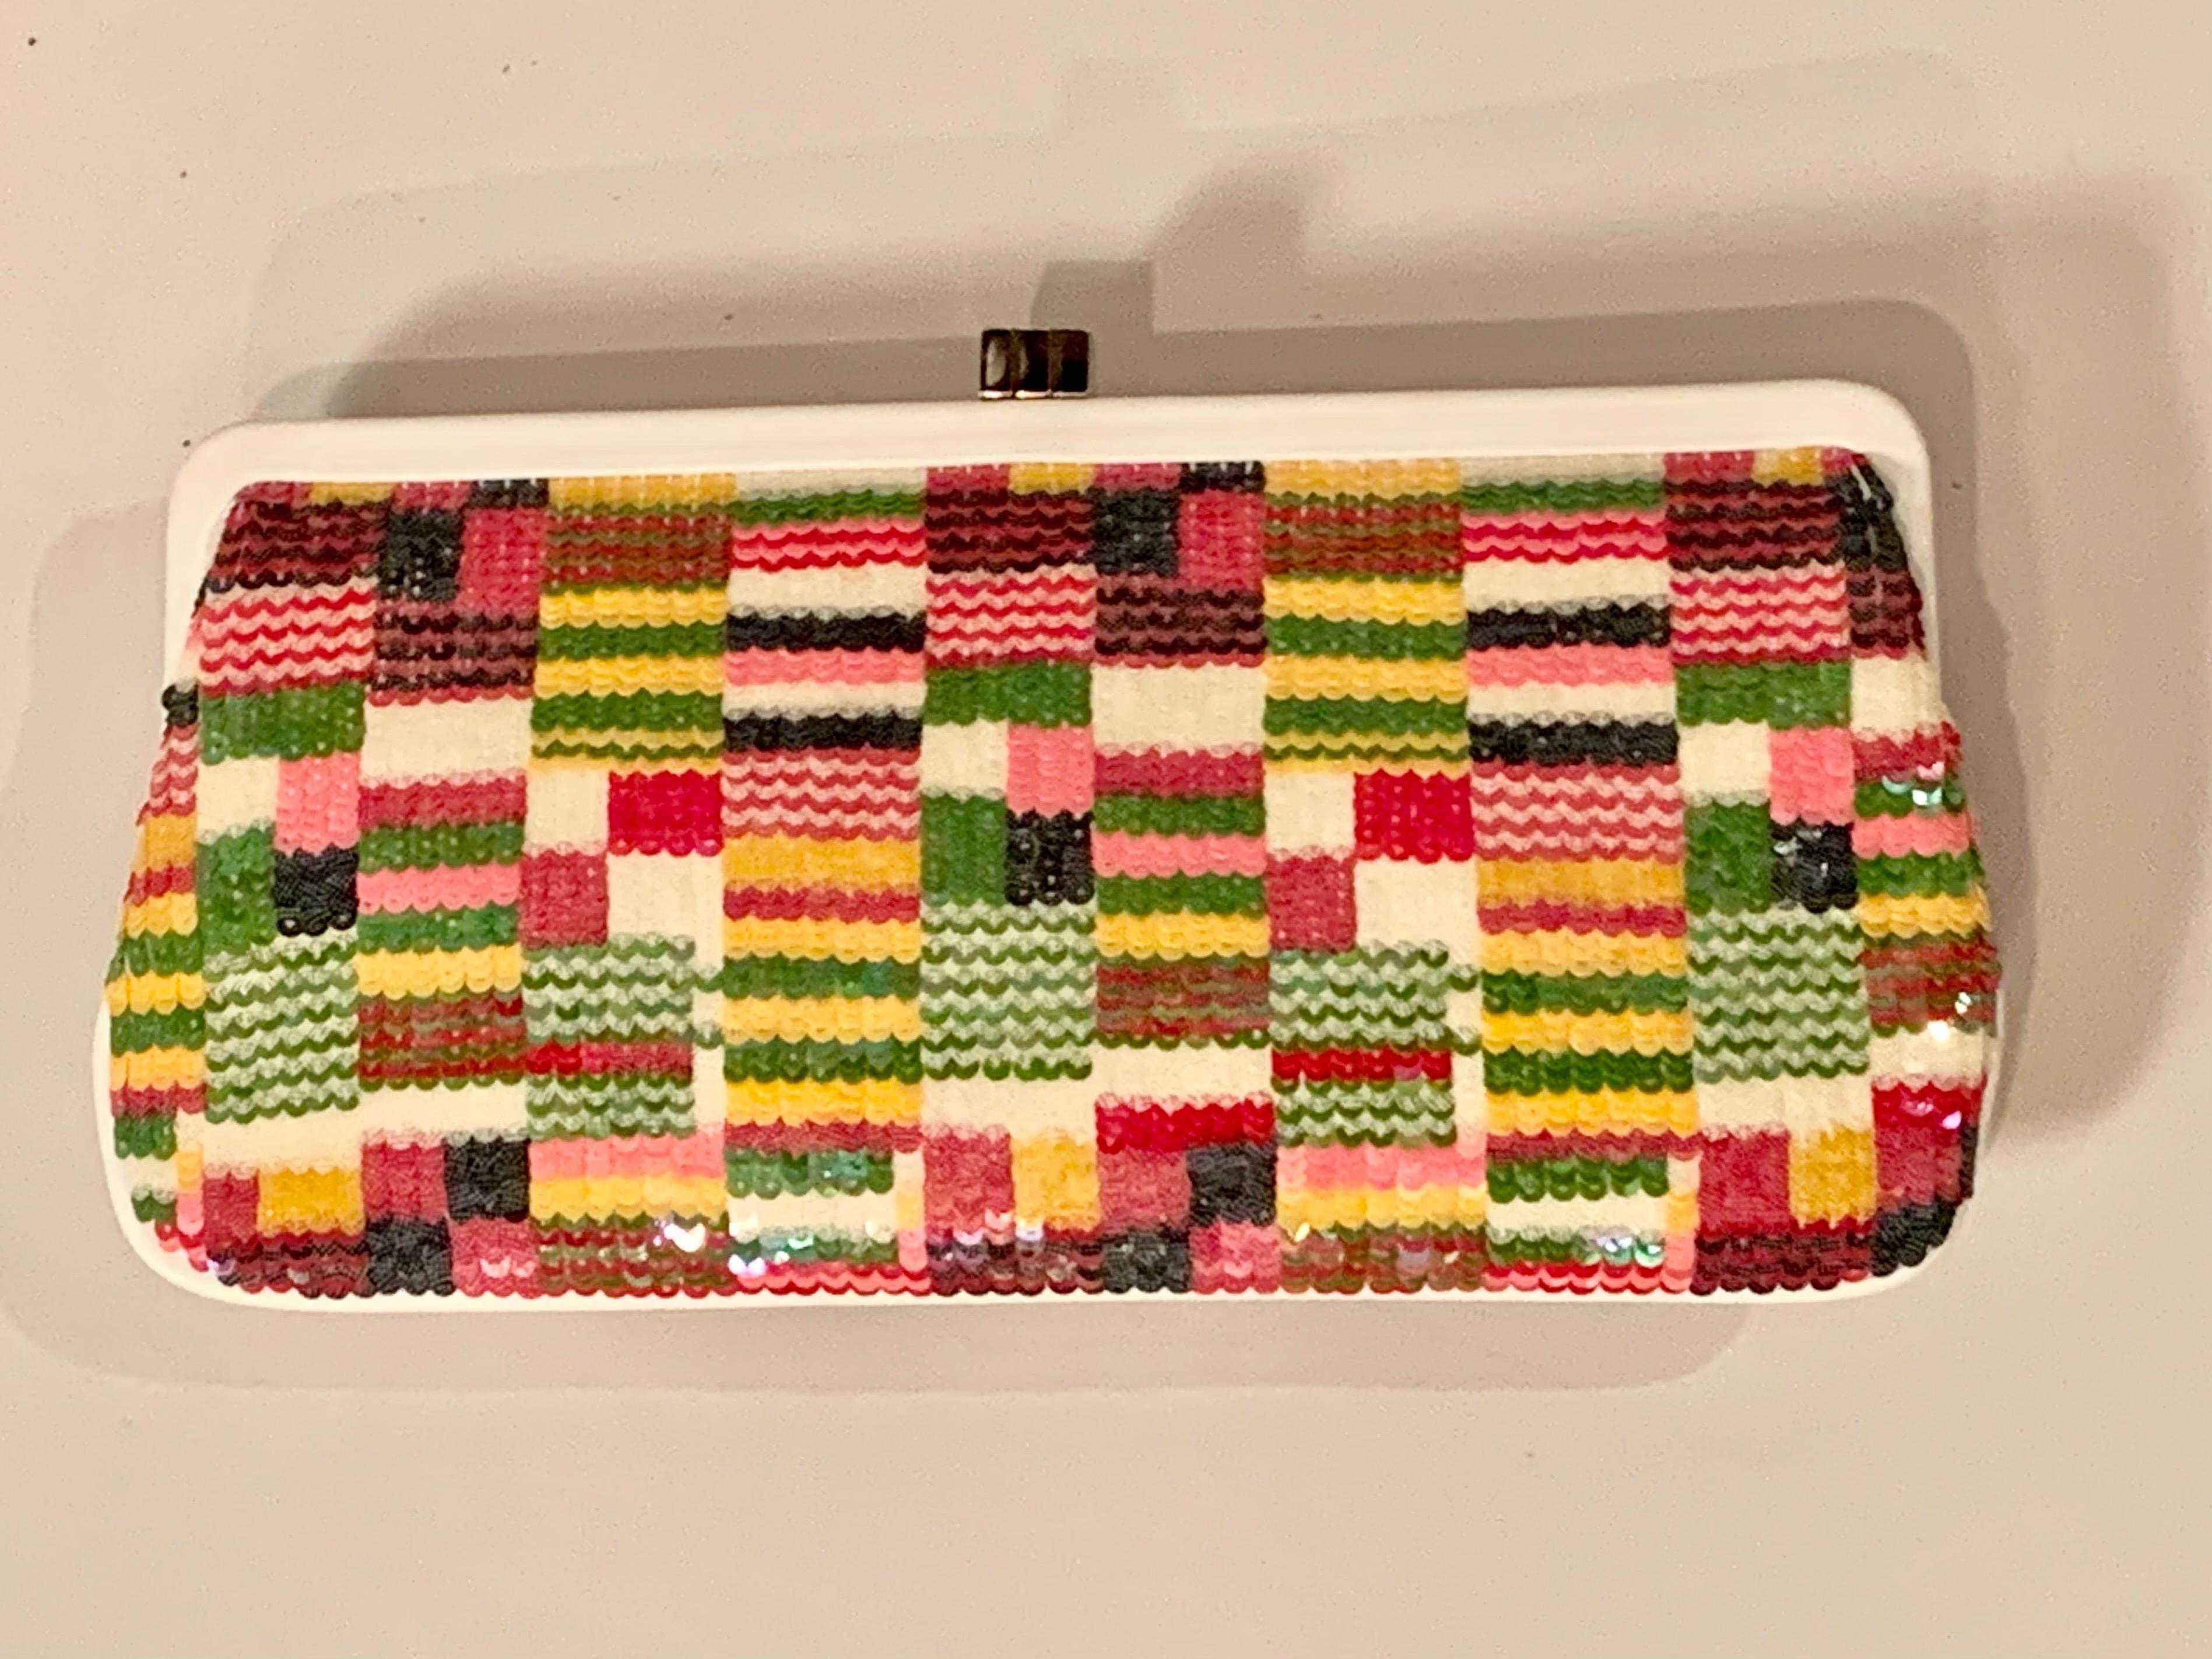 Lambertson Truex Leather and Multi Color Sequin Clutch Bag In Excellent Condition For Sale In New Hope, PA